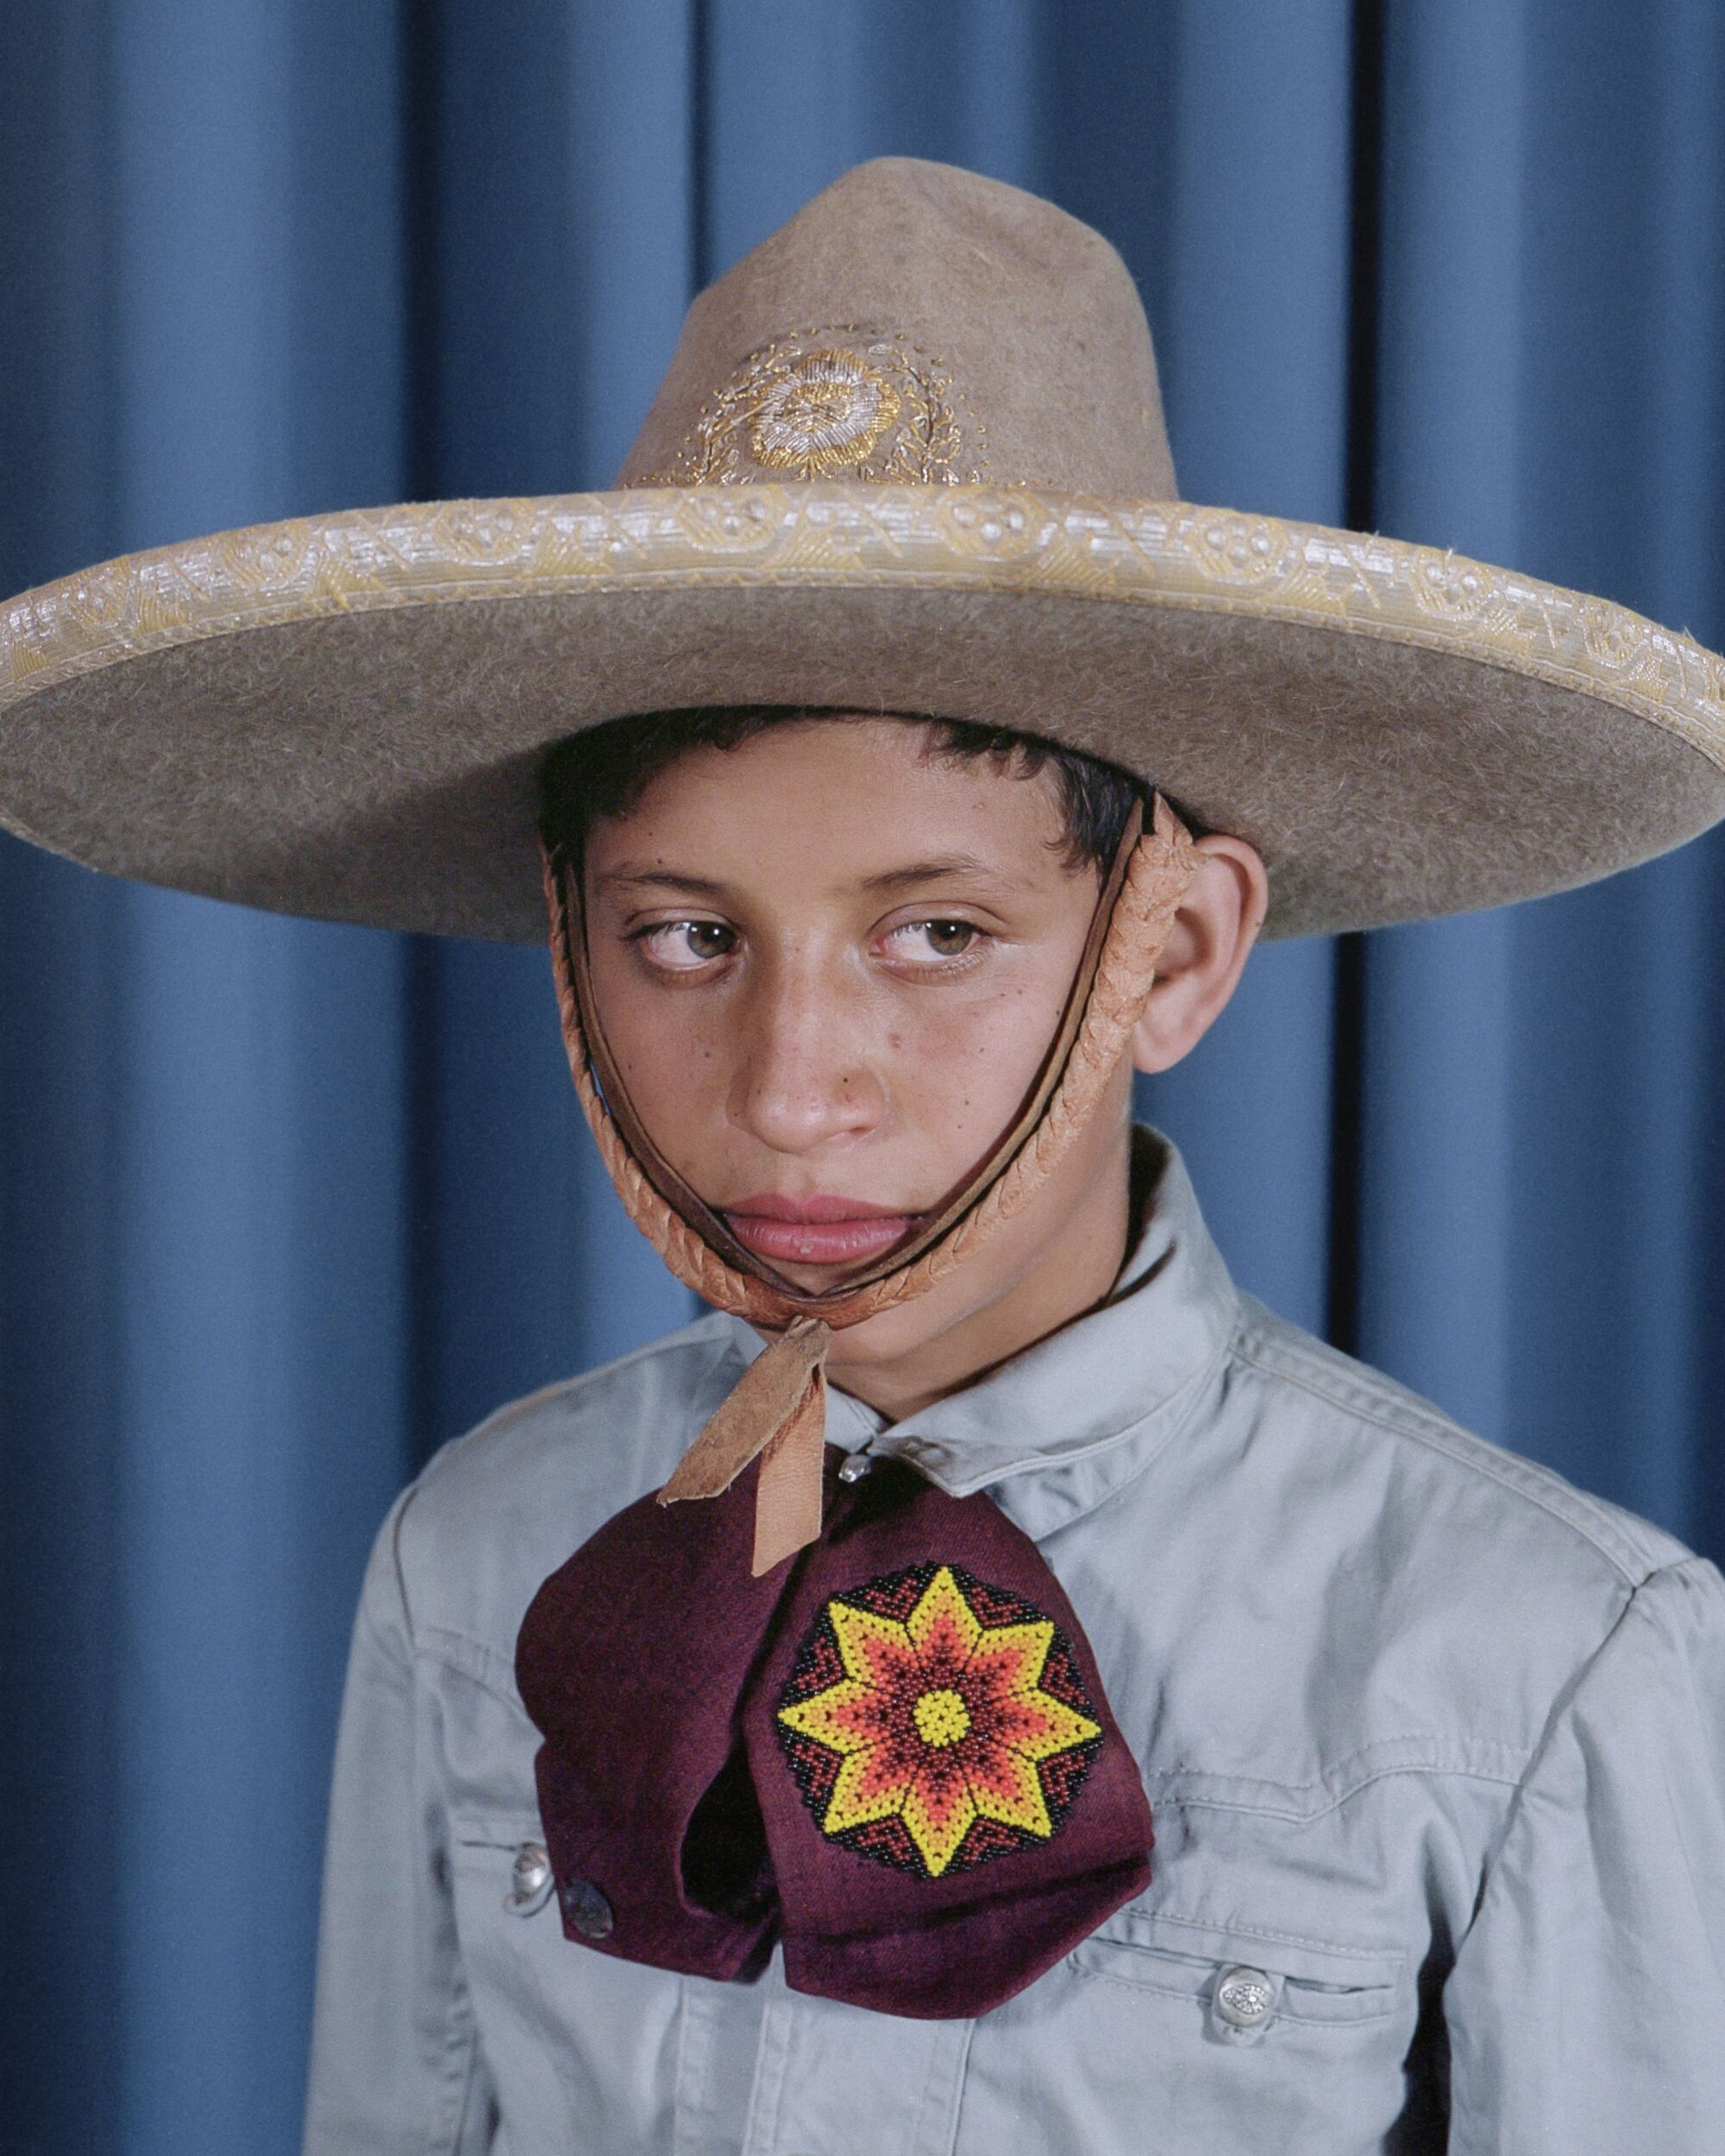 A boy in a sombrero poses for a portrait on a blue background.